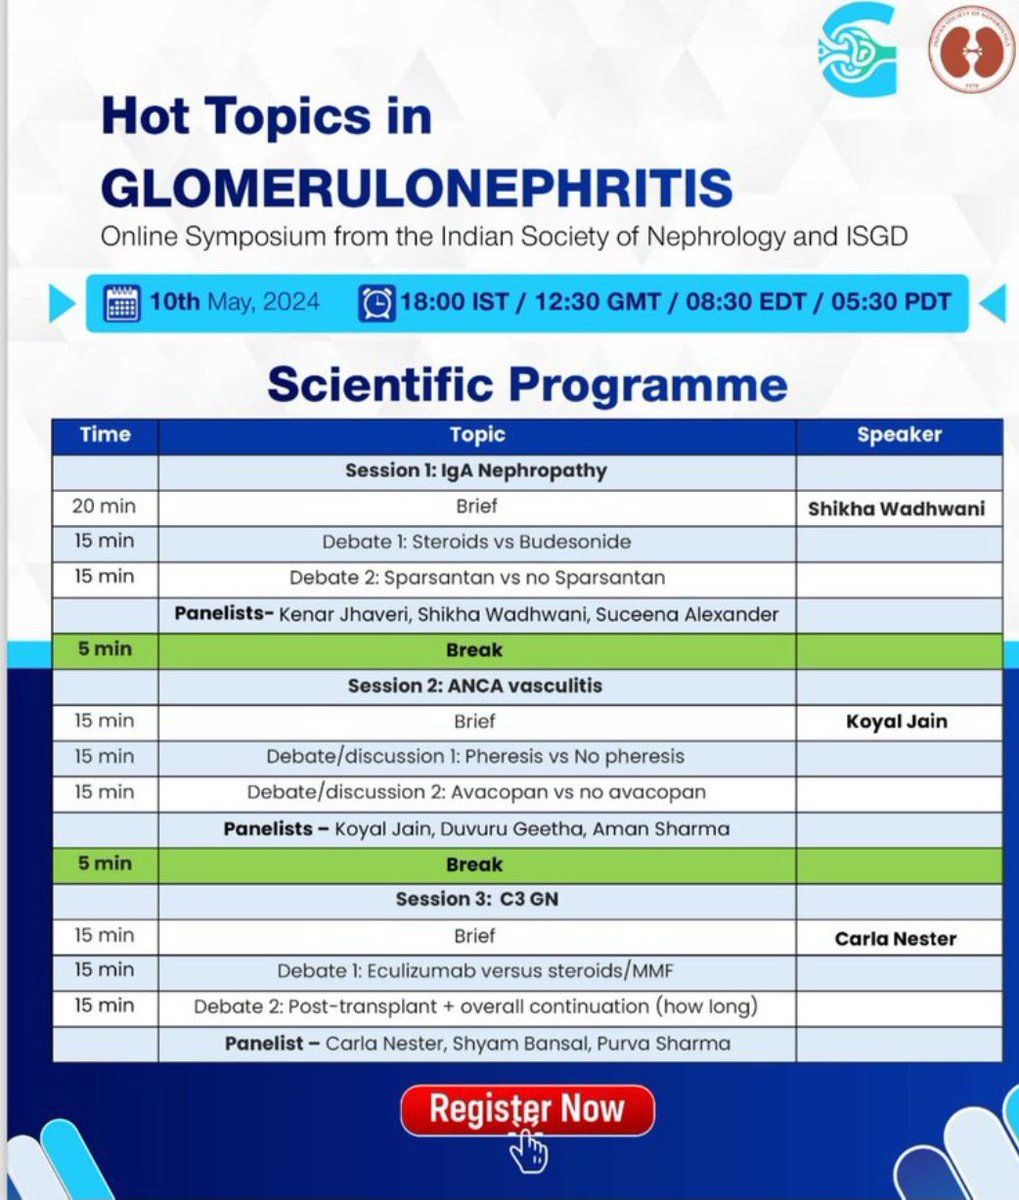 Gentle Reminder.. Dont Miss the interesting talks in Online Symposium on Glomerulnephritis by the @isn_india and @ISGDtweets. 10th May 2024, 6.00PM IST. @drshyambansal @AVATAROrg @manirath @ISNeducation @ASNKidney @GlomCon @ASPNeph Register at is-gd.org/hot-topics-in